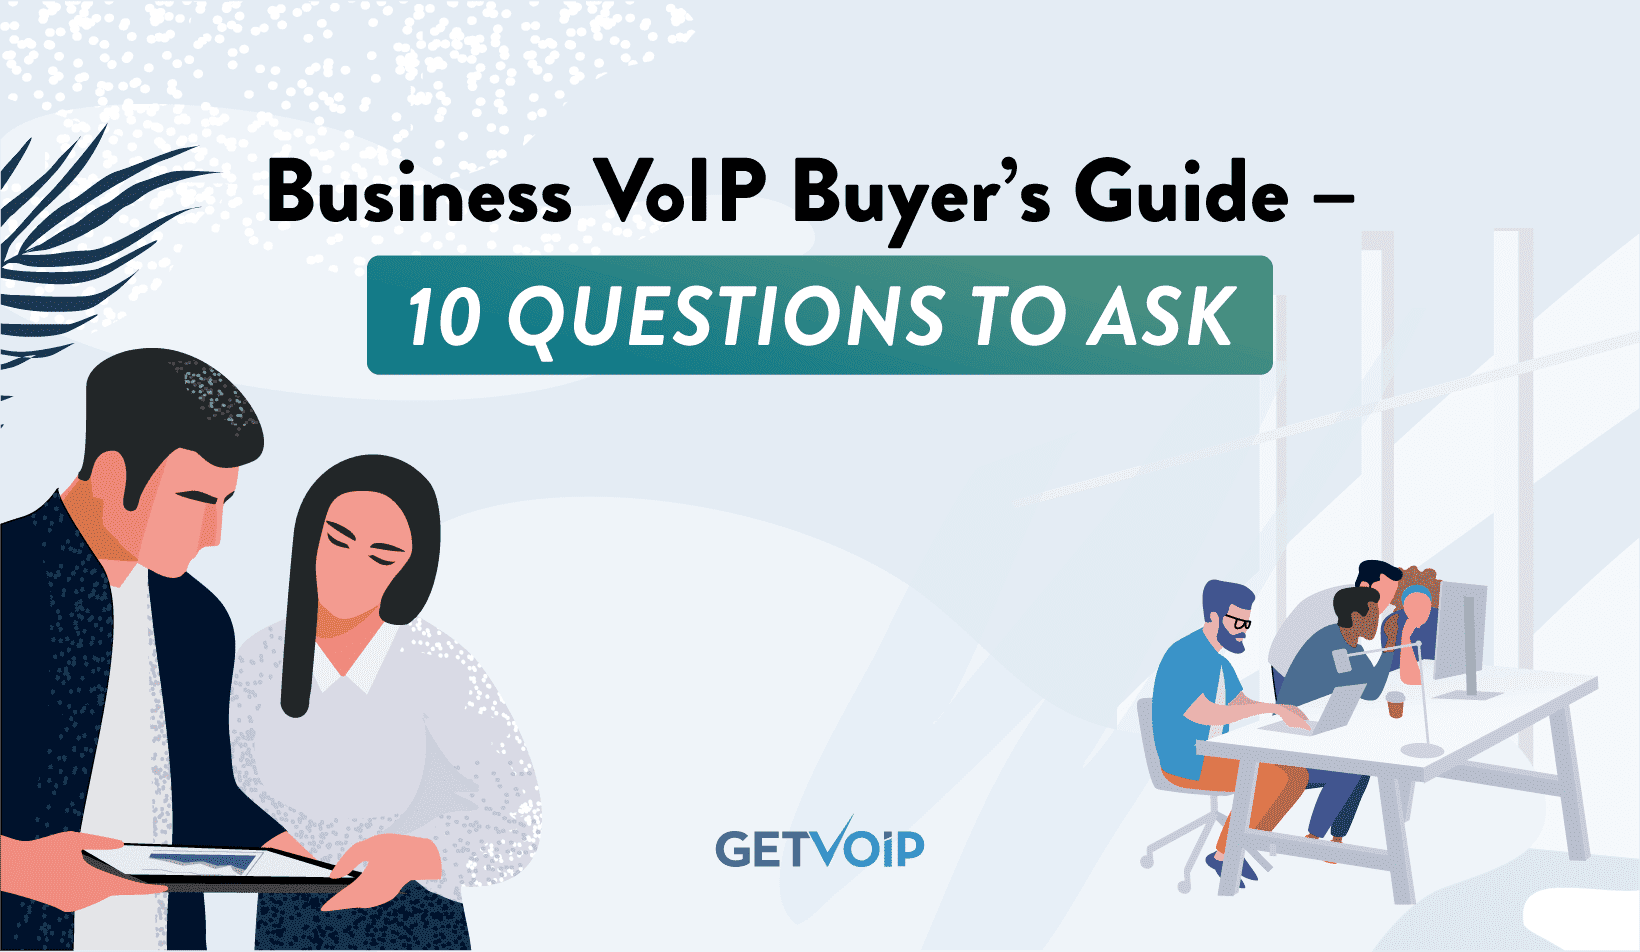 Business VoIP Buyer’s Guide – 10 Questions to Ask